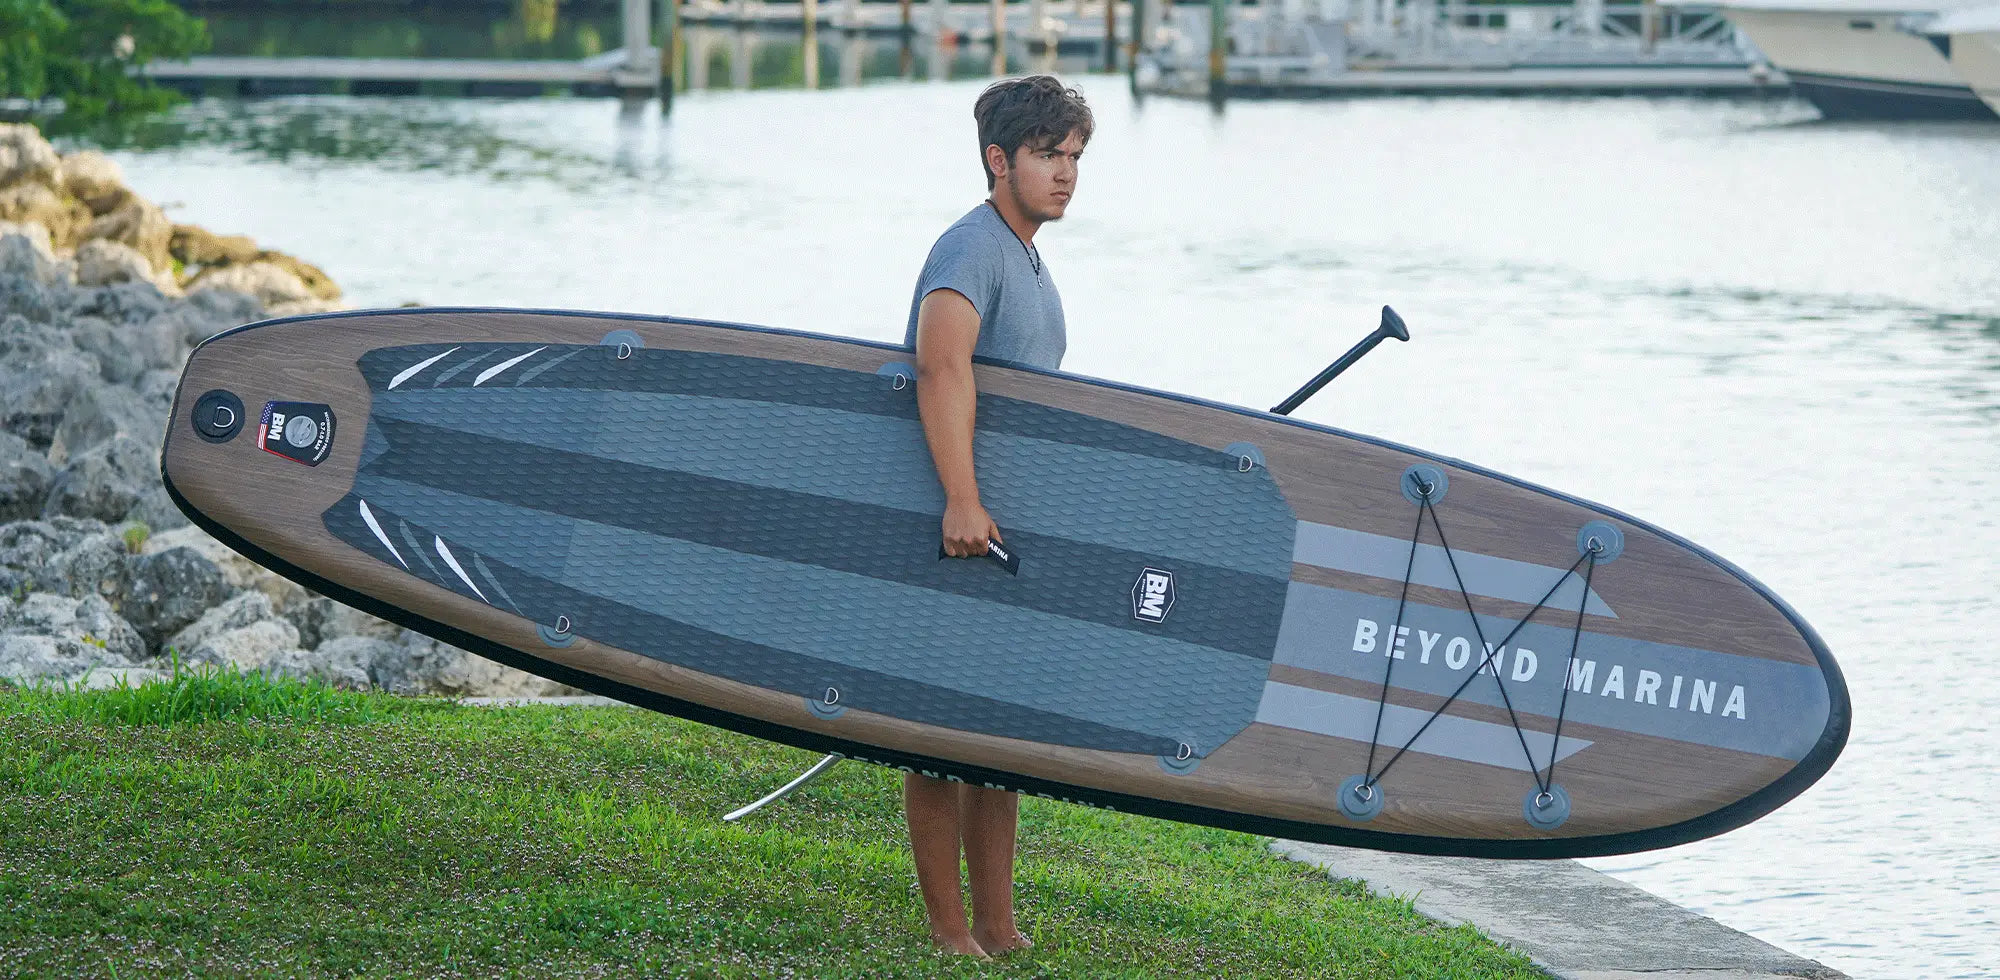 Beyond Marina wooden series paddle board on water, highlighting elegance and performance.